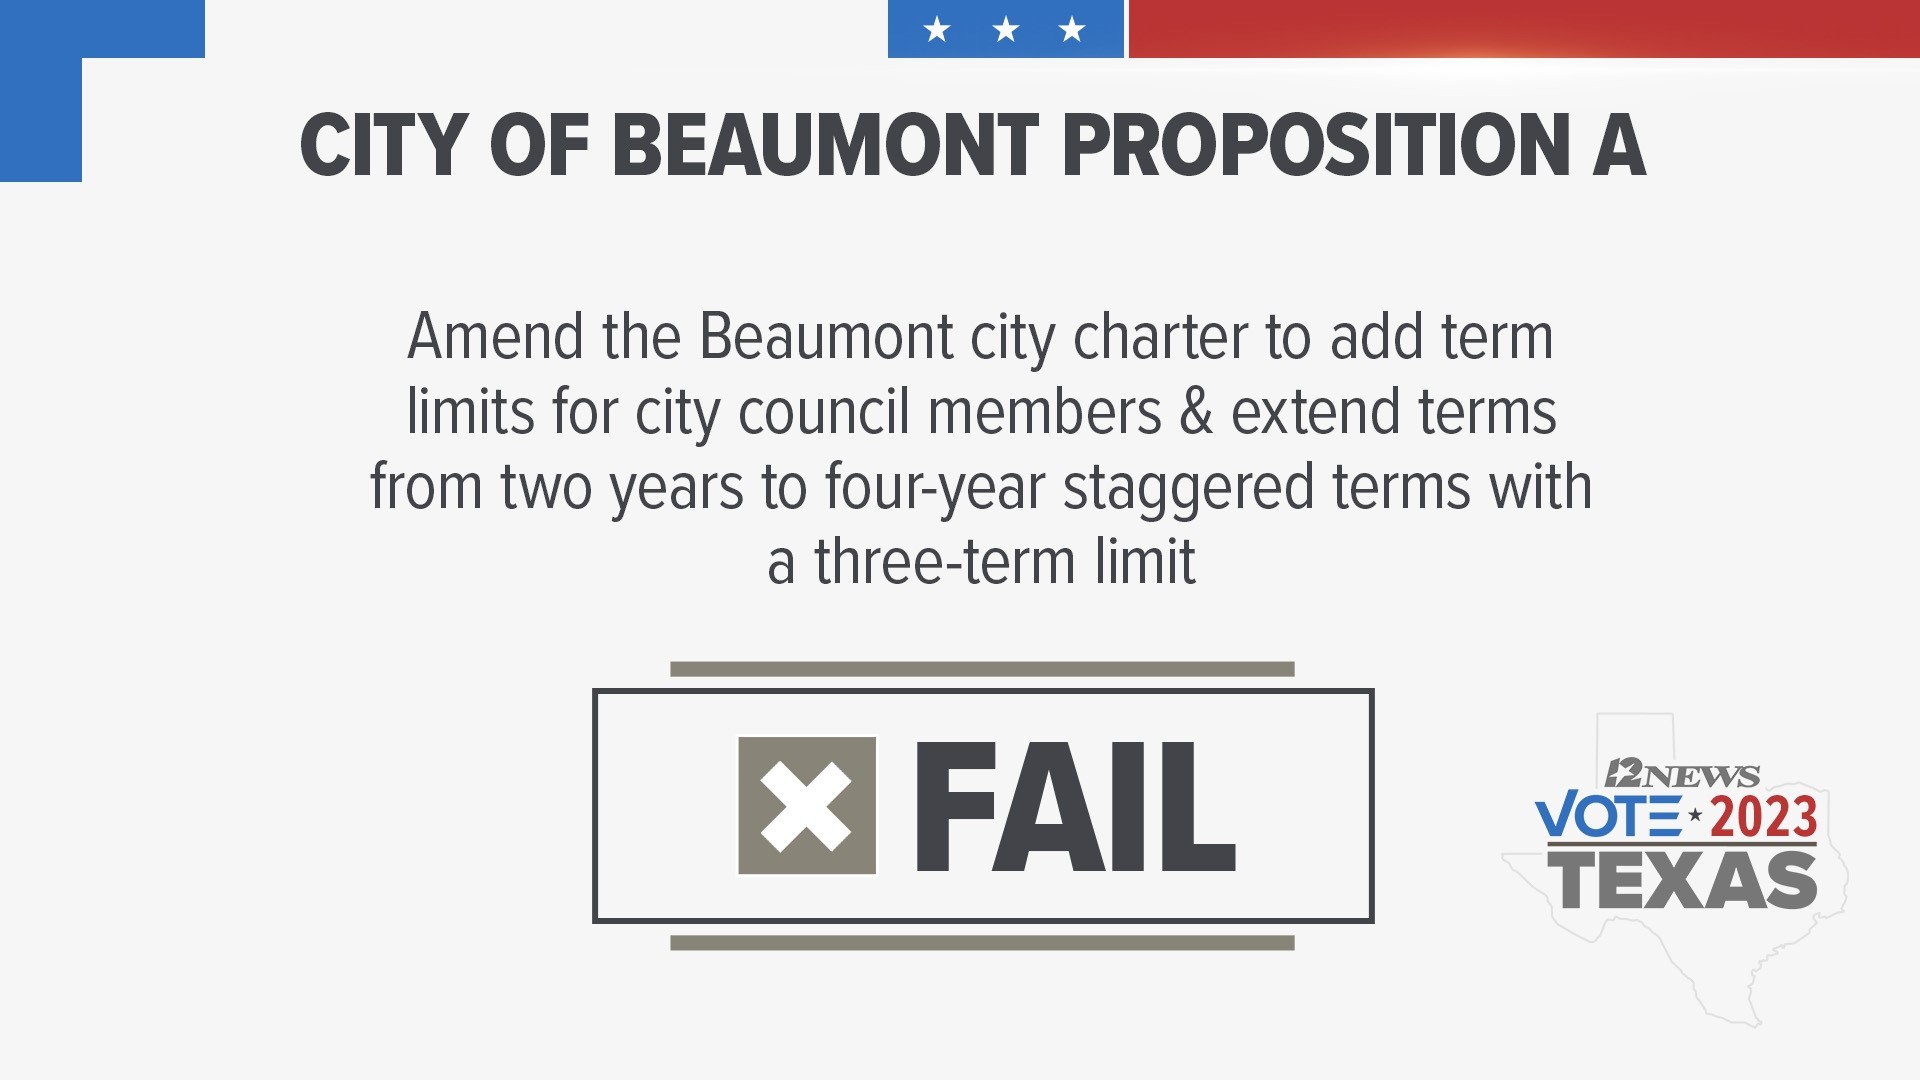 Beaumont's Proposition A would have amended the city charter to increase council member's current two-year terms to staggered four-year terms.